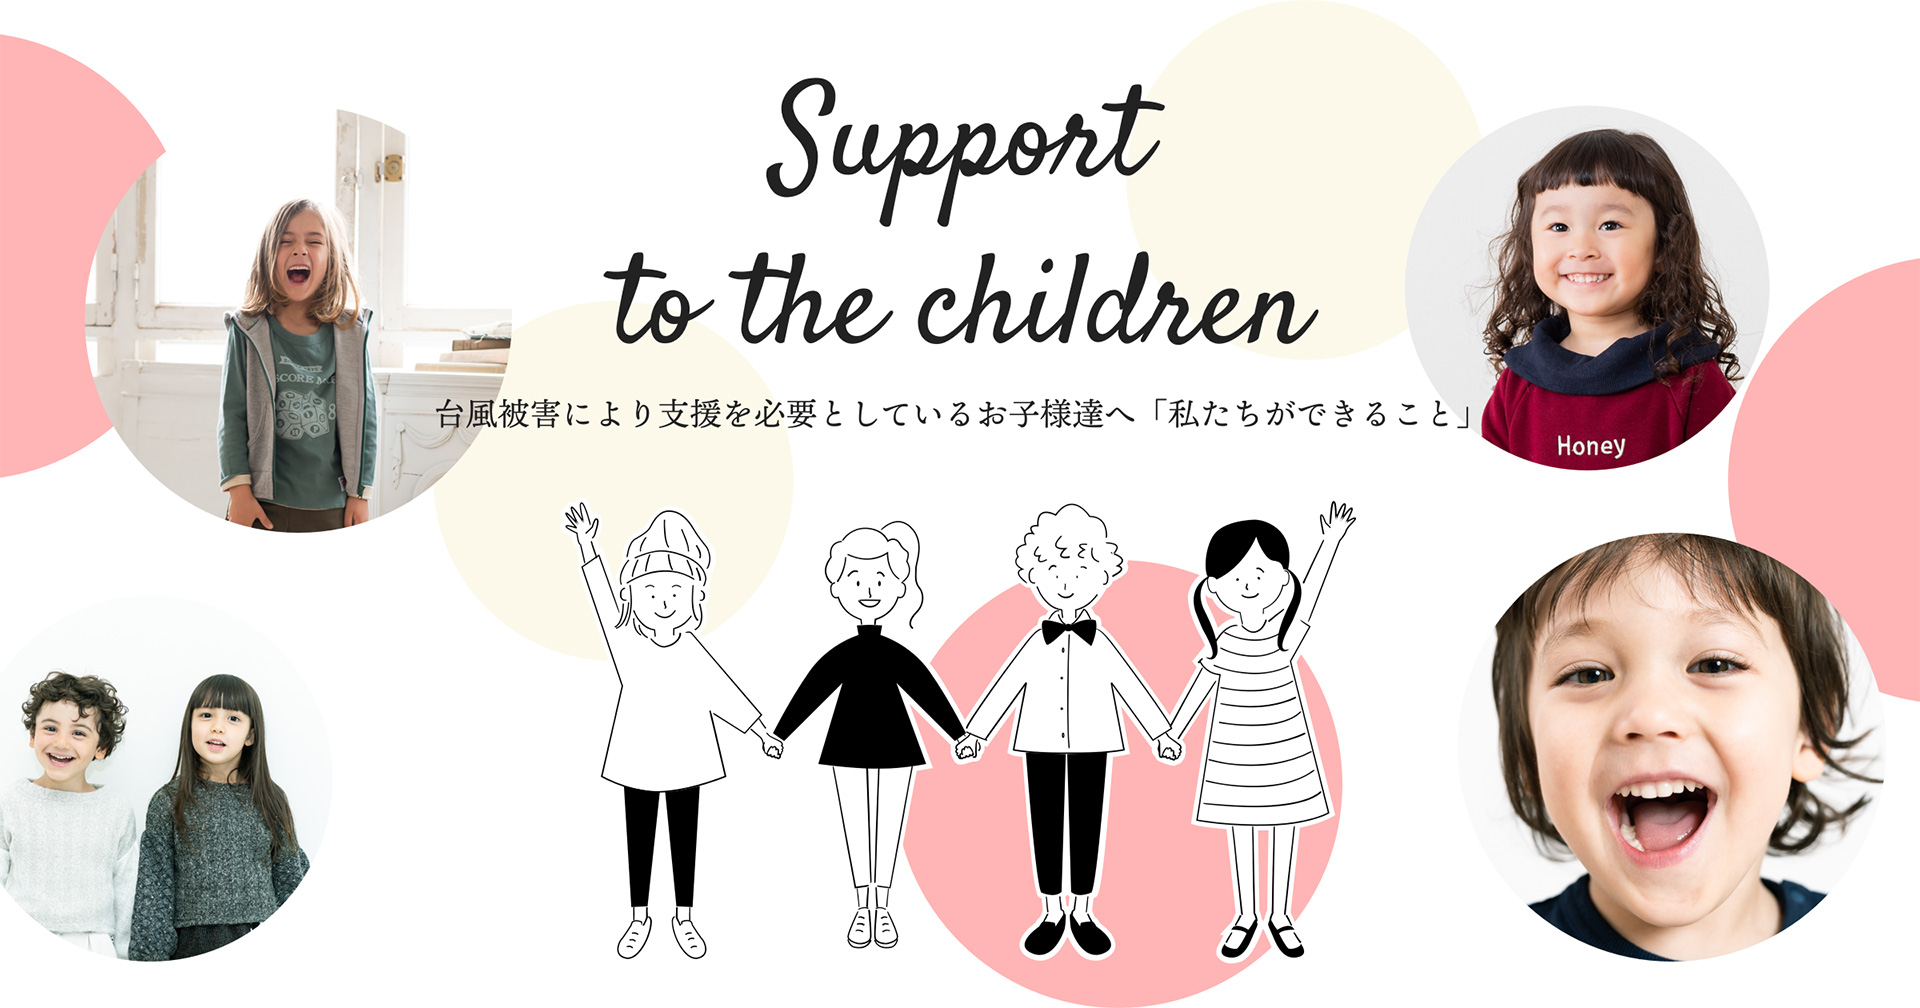 Support to the children